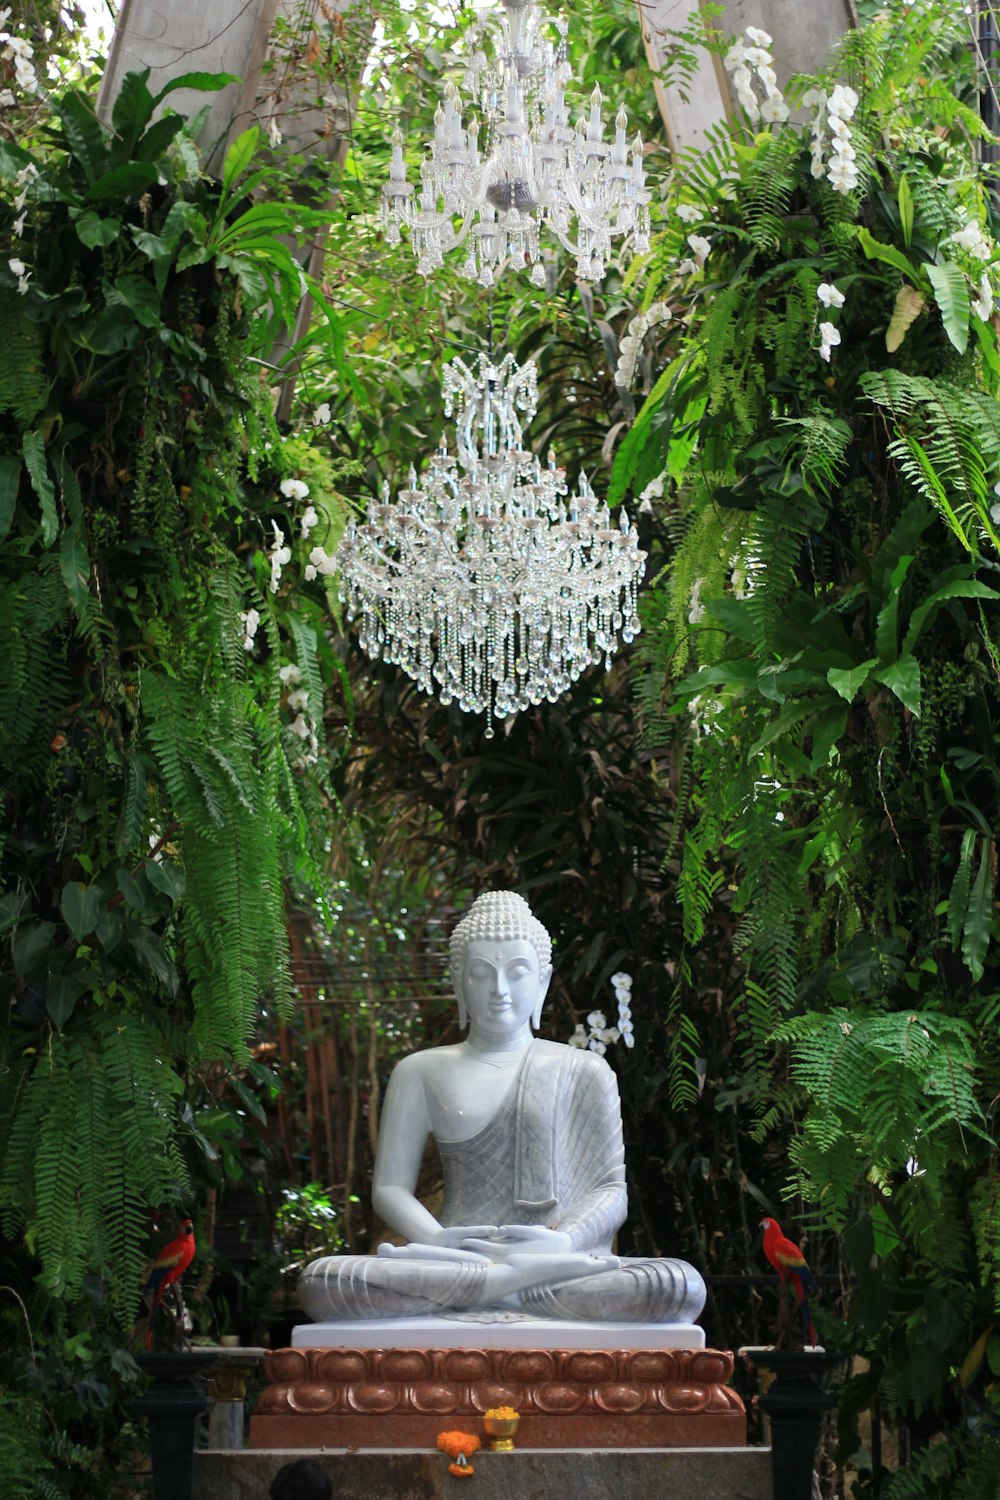 a buddha statue sitting in a garden surrounded by greenery